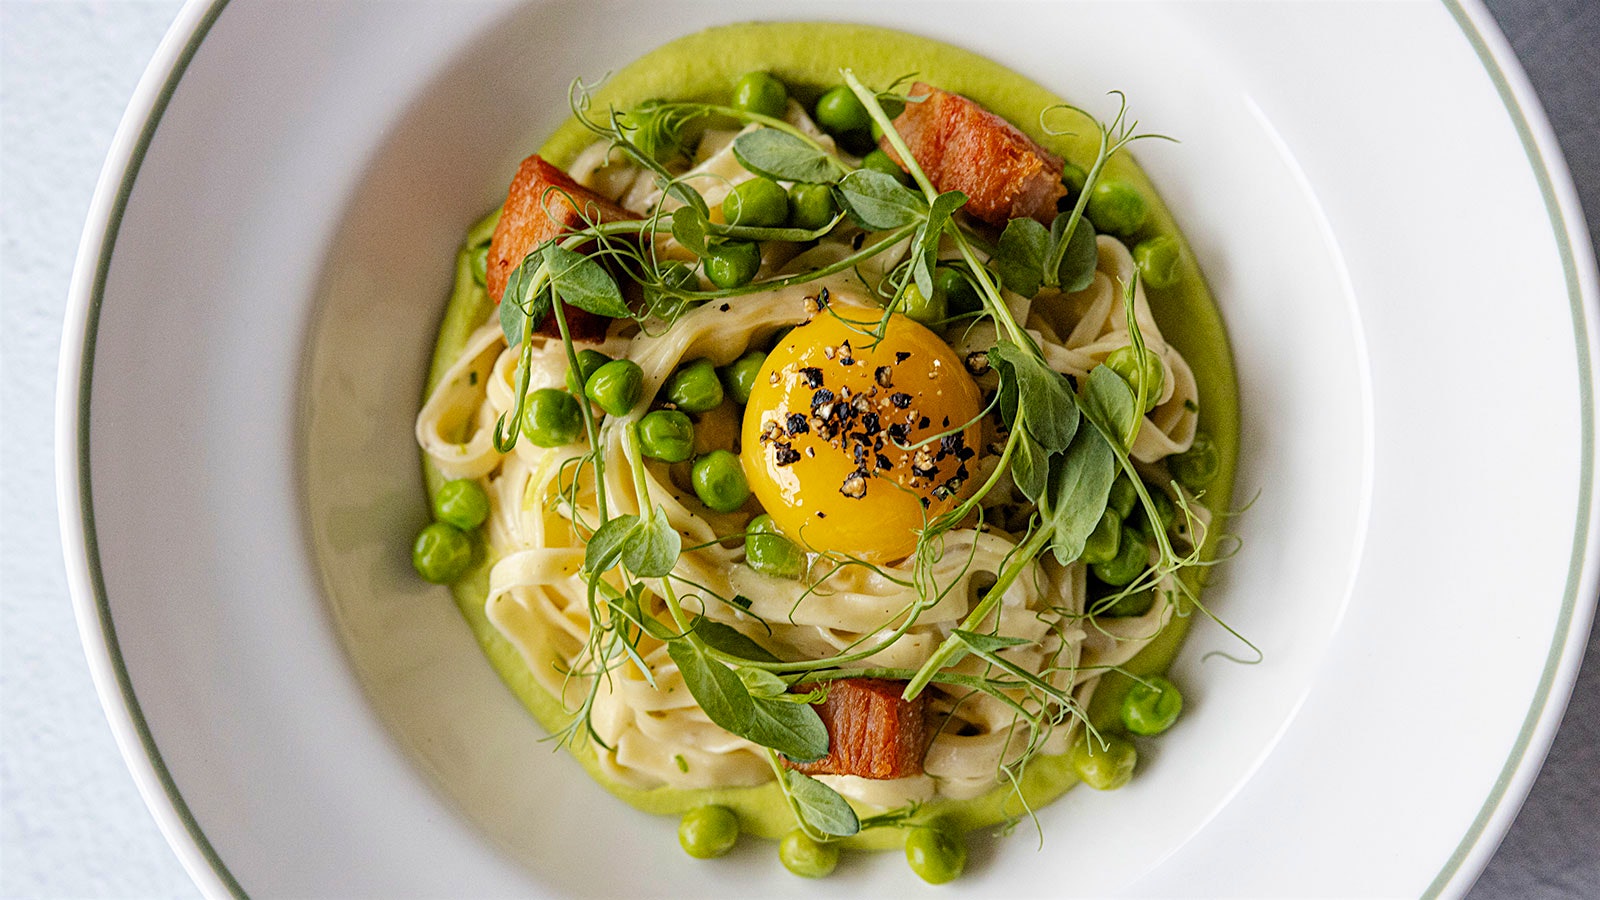  A nest of spaghetti carbonara with green herbs, peas and a golden egg yolk.